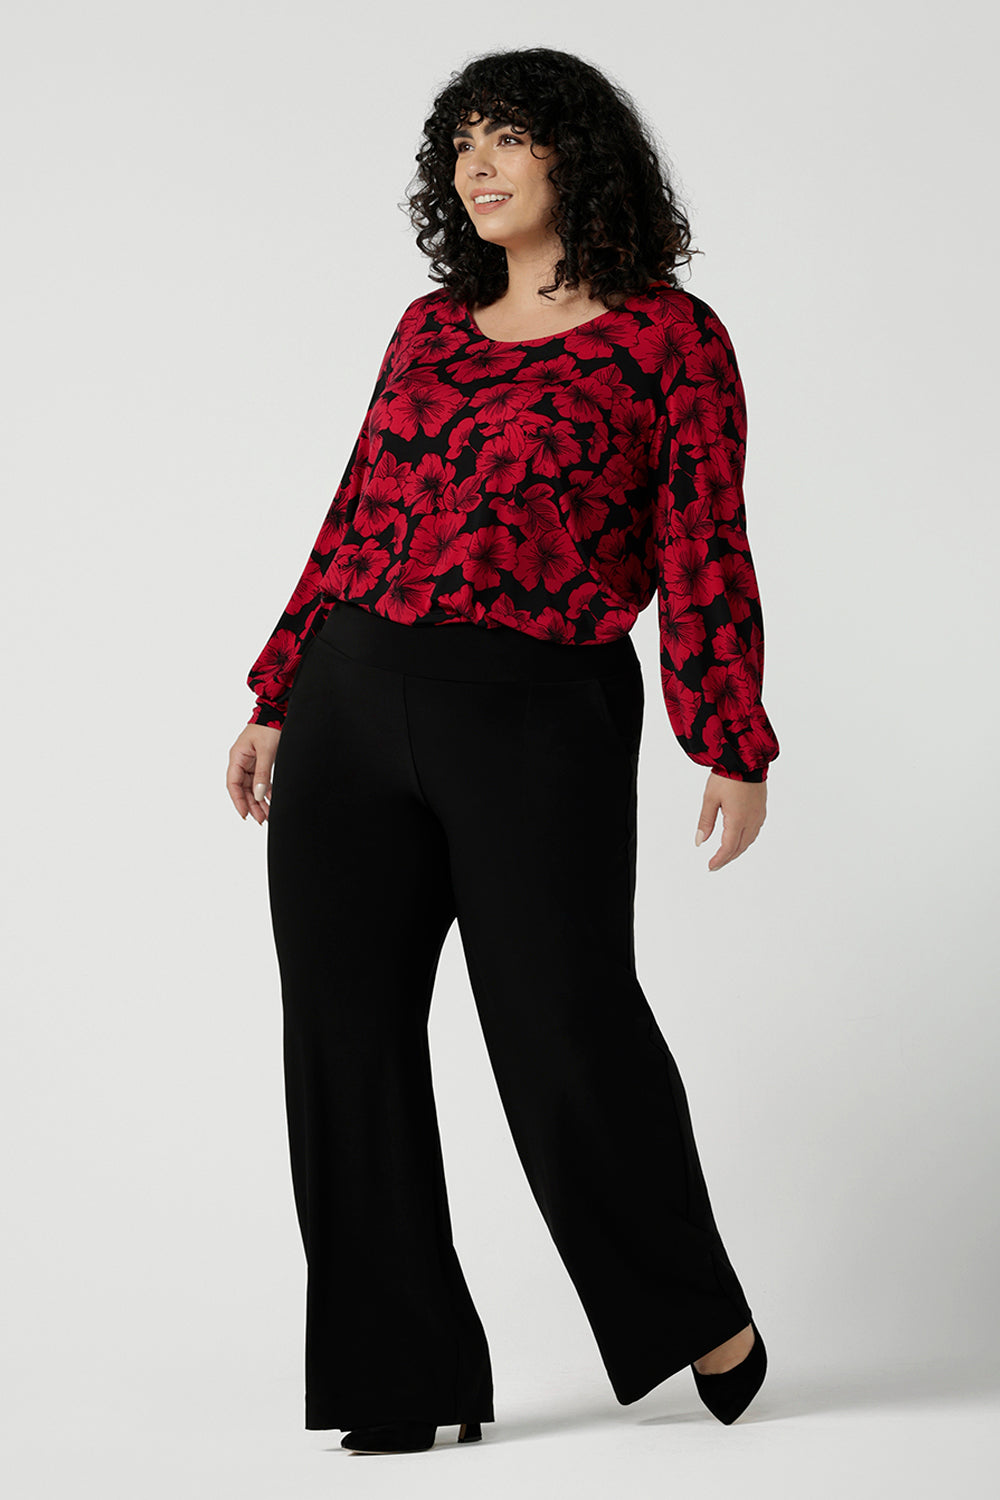 Front view of a size 18 woman wearing the scoop neck bold poppy top with balloon sleeves. Curved hemline and cuffed sleeves. Made in Australia for women size 8 - 24. Styled back with the Monroe pant in black, a straight leg comfortable corporate work pant.